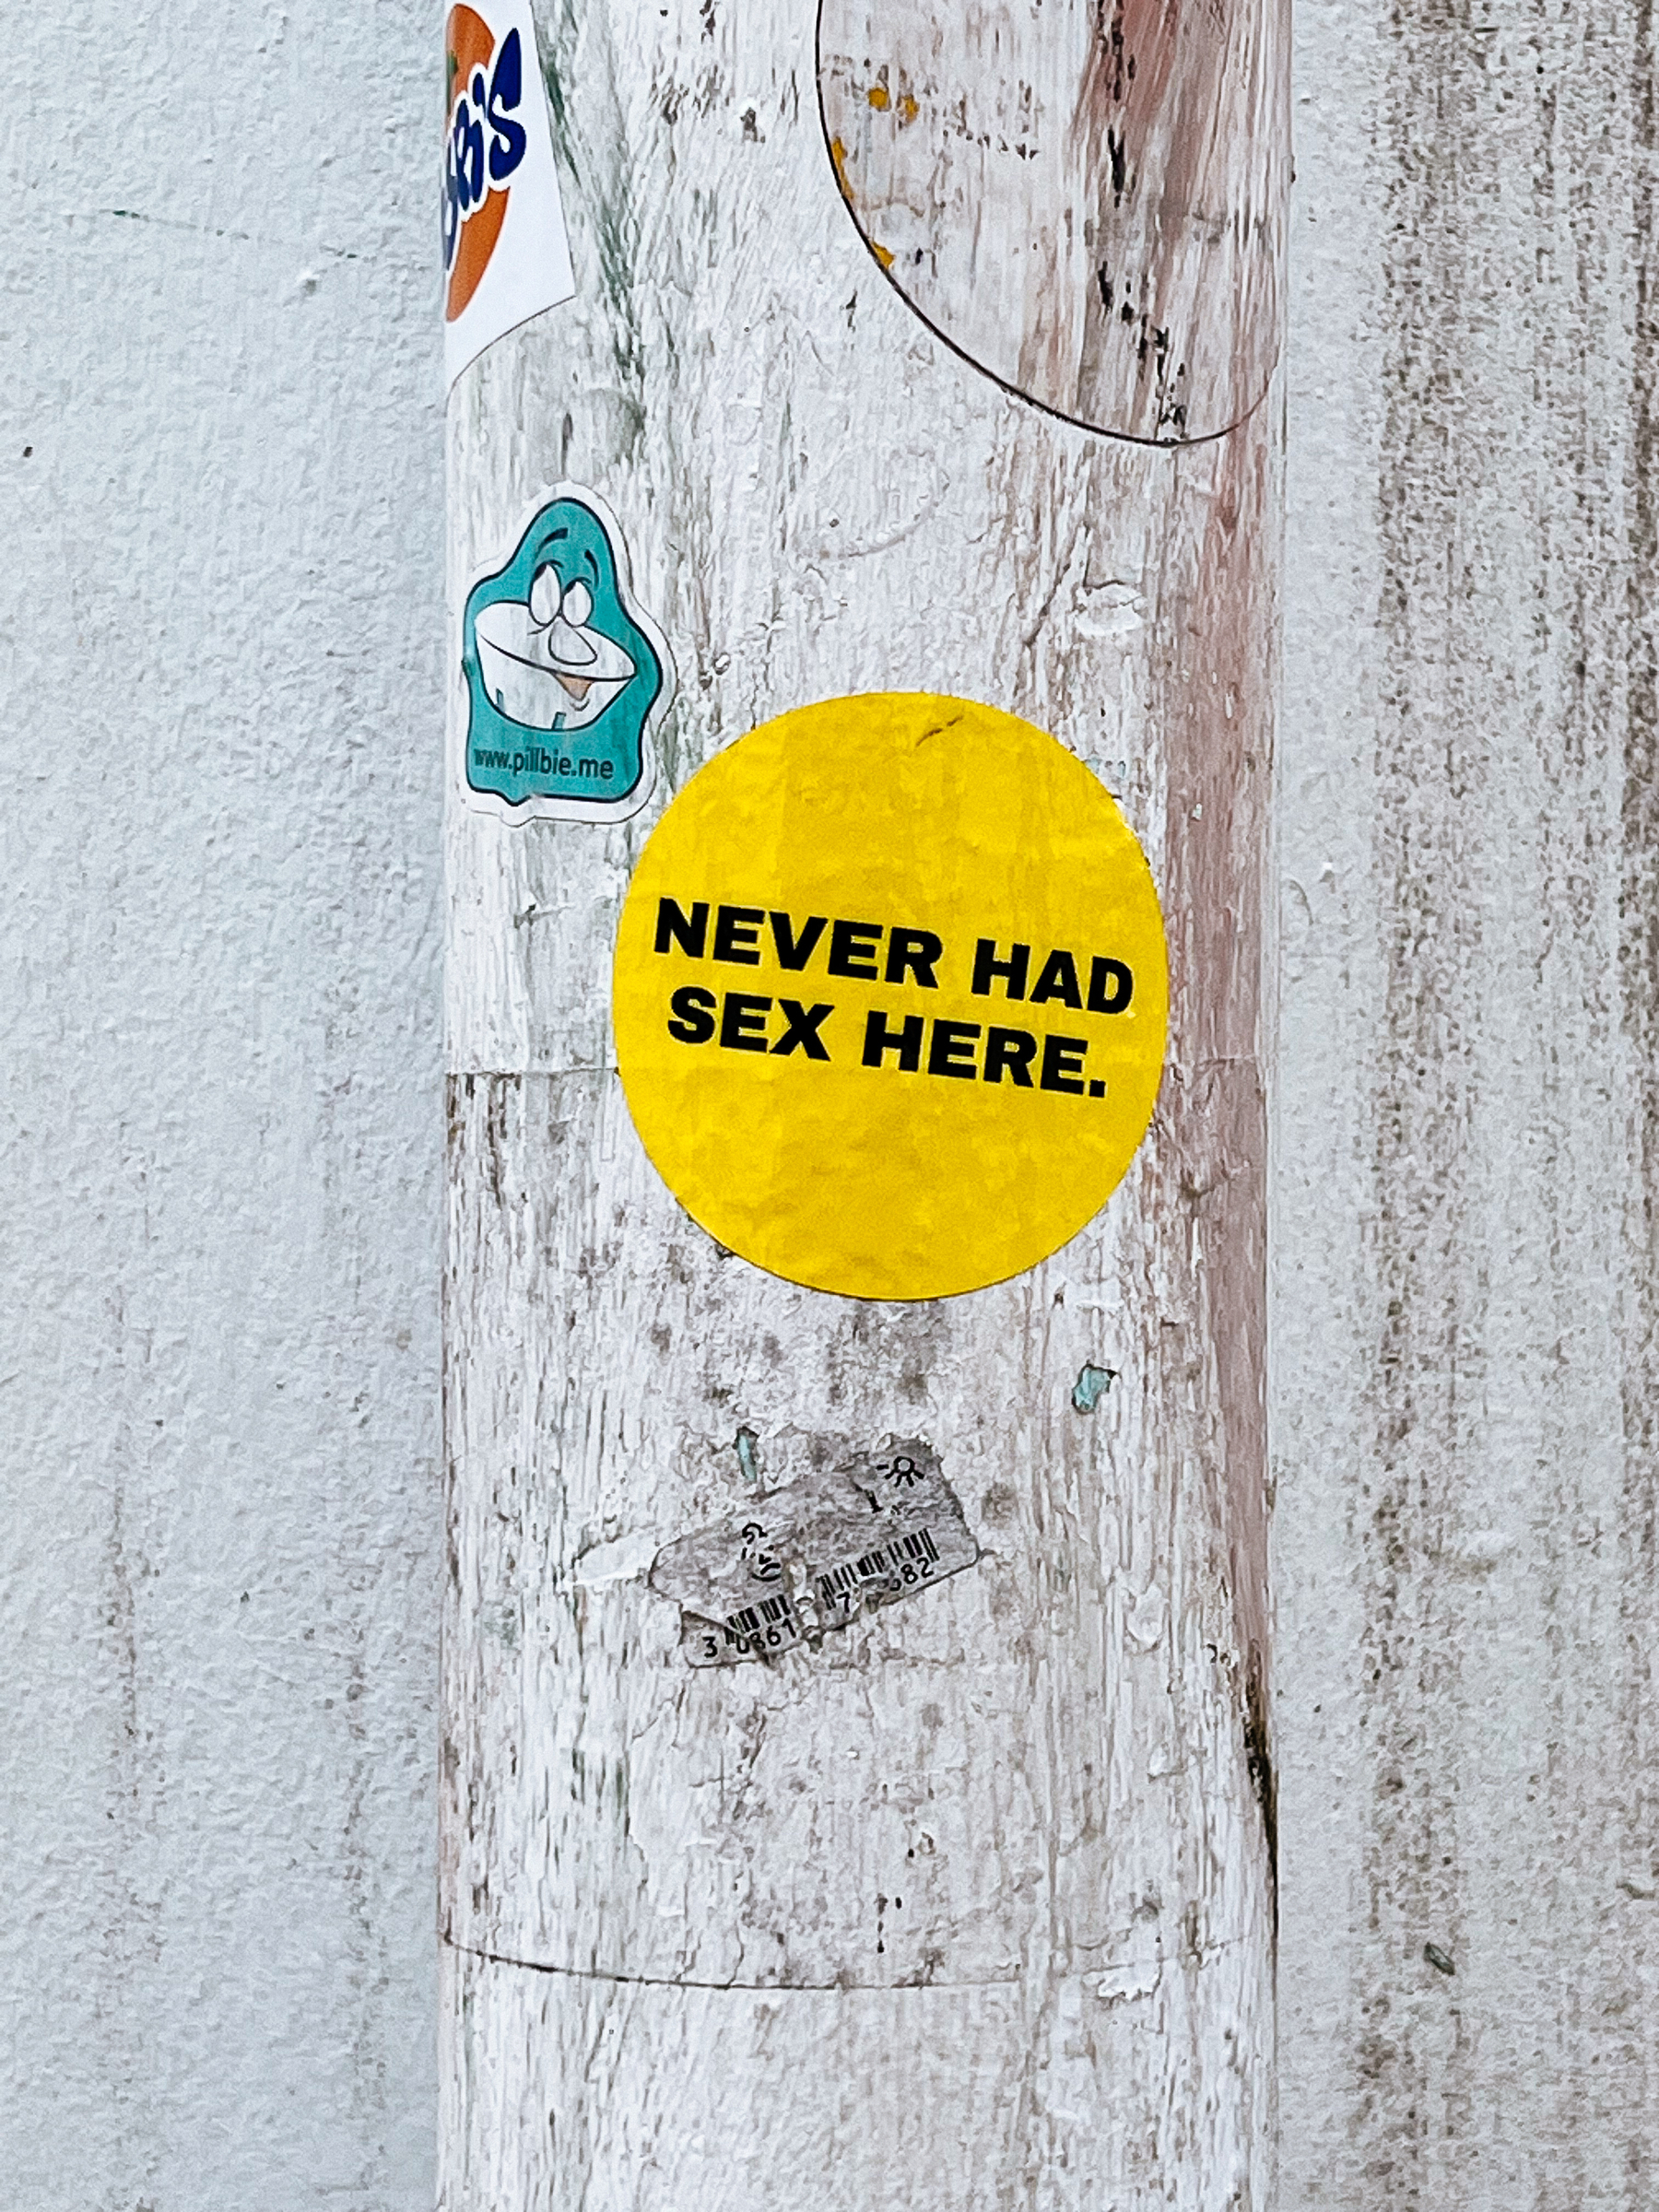 “Never had sex here”, on a circular yellow sticker. 